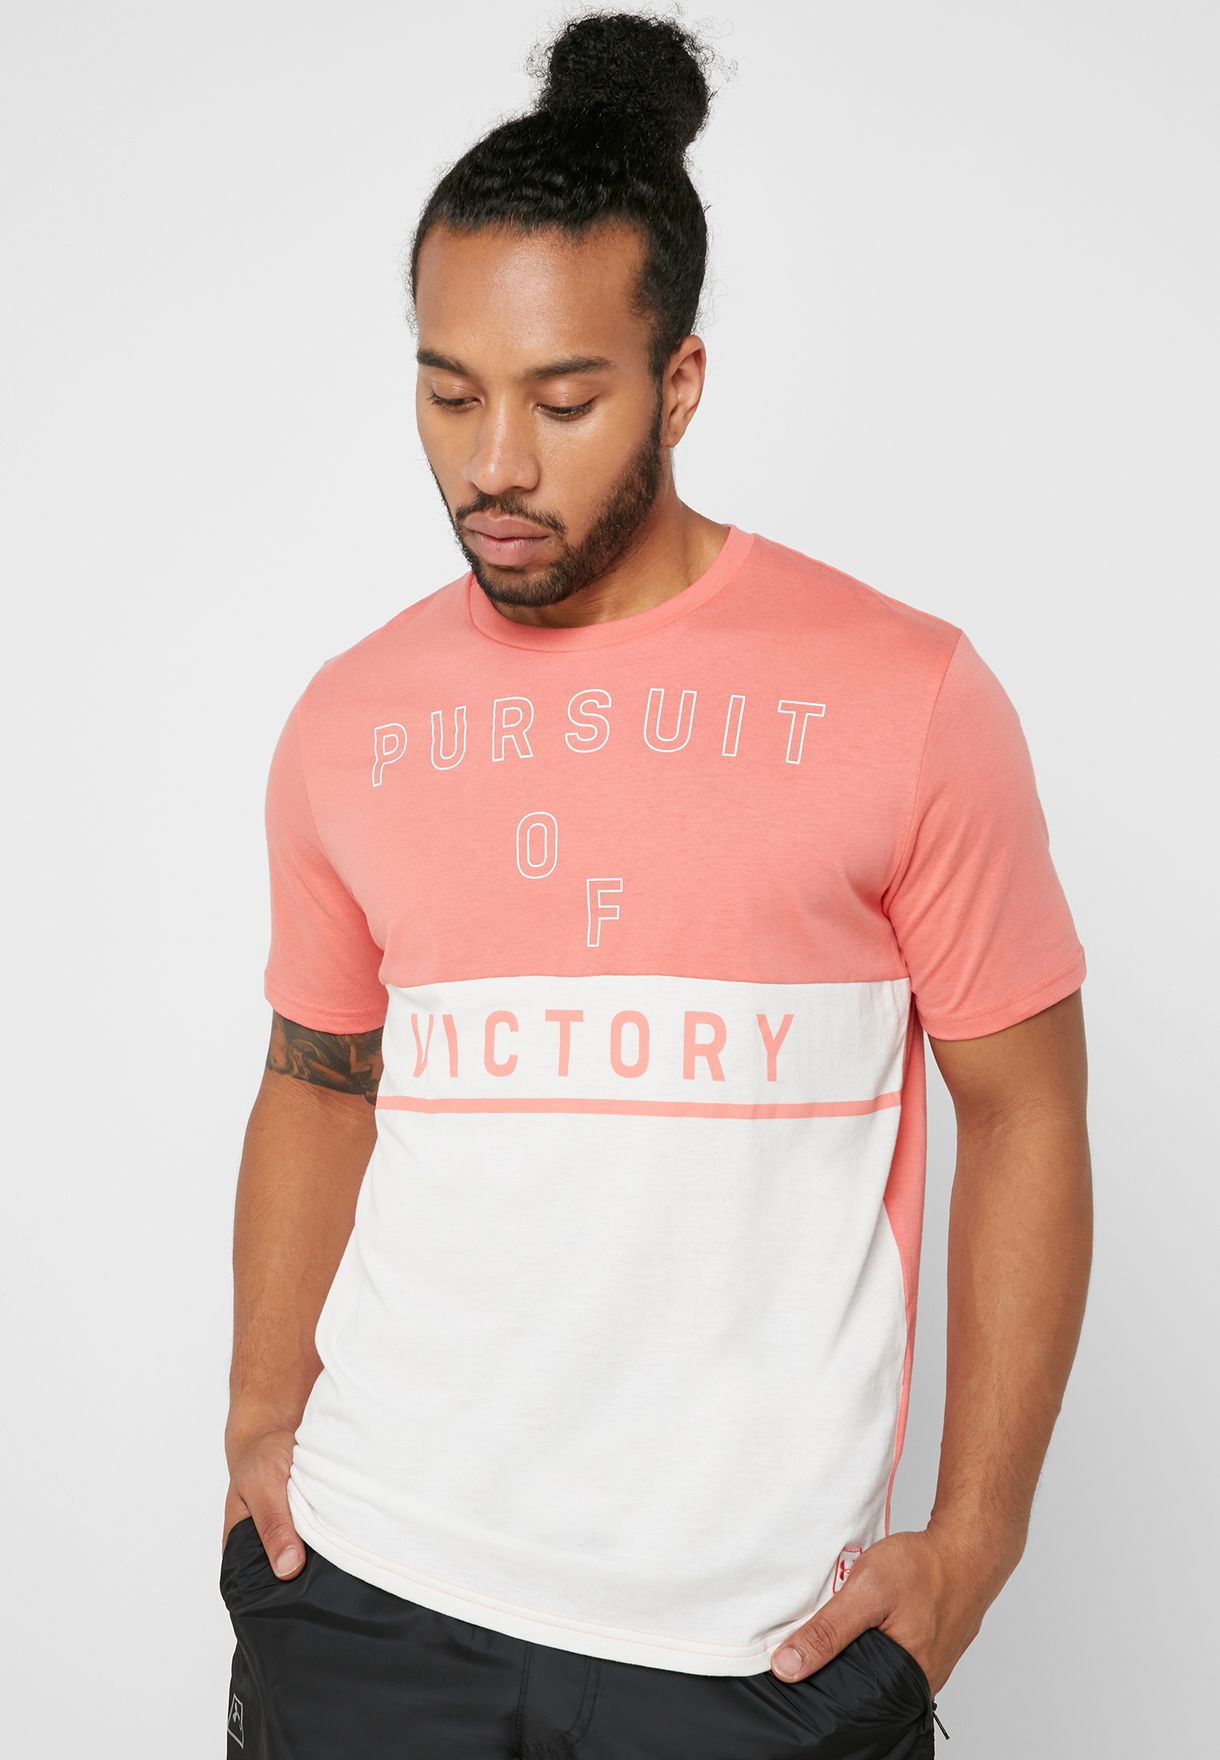 Pink New Under Armour UA Men's Pursuit of Victory Short Sleeve T-Shirt 